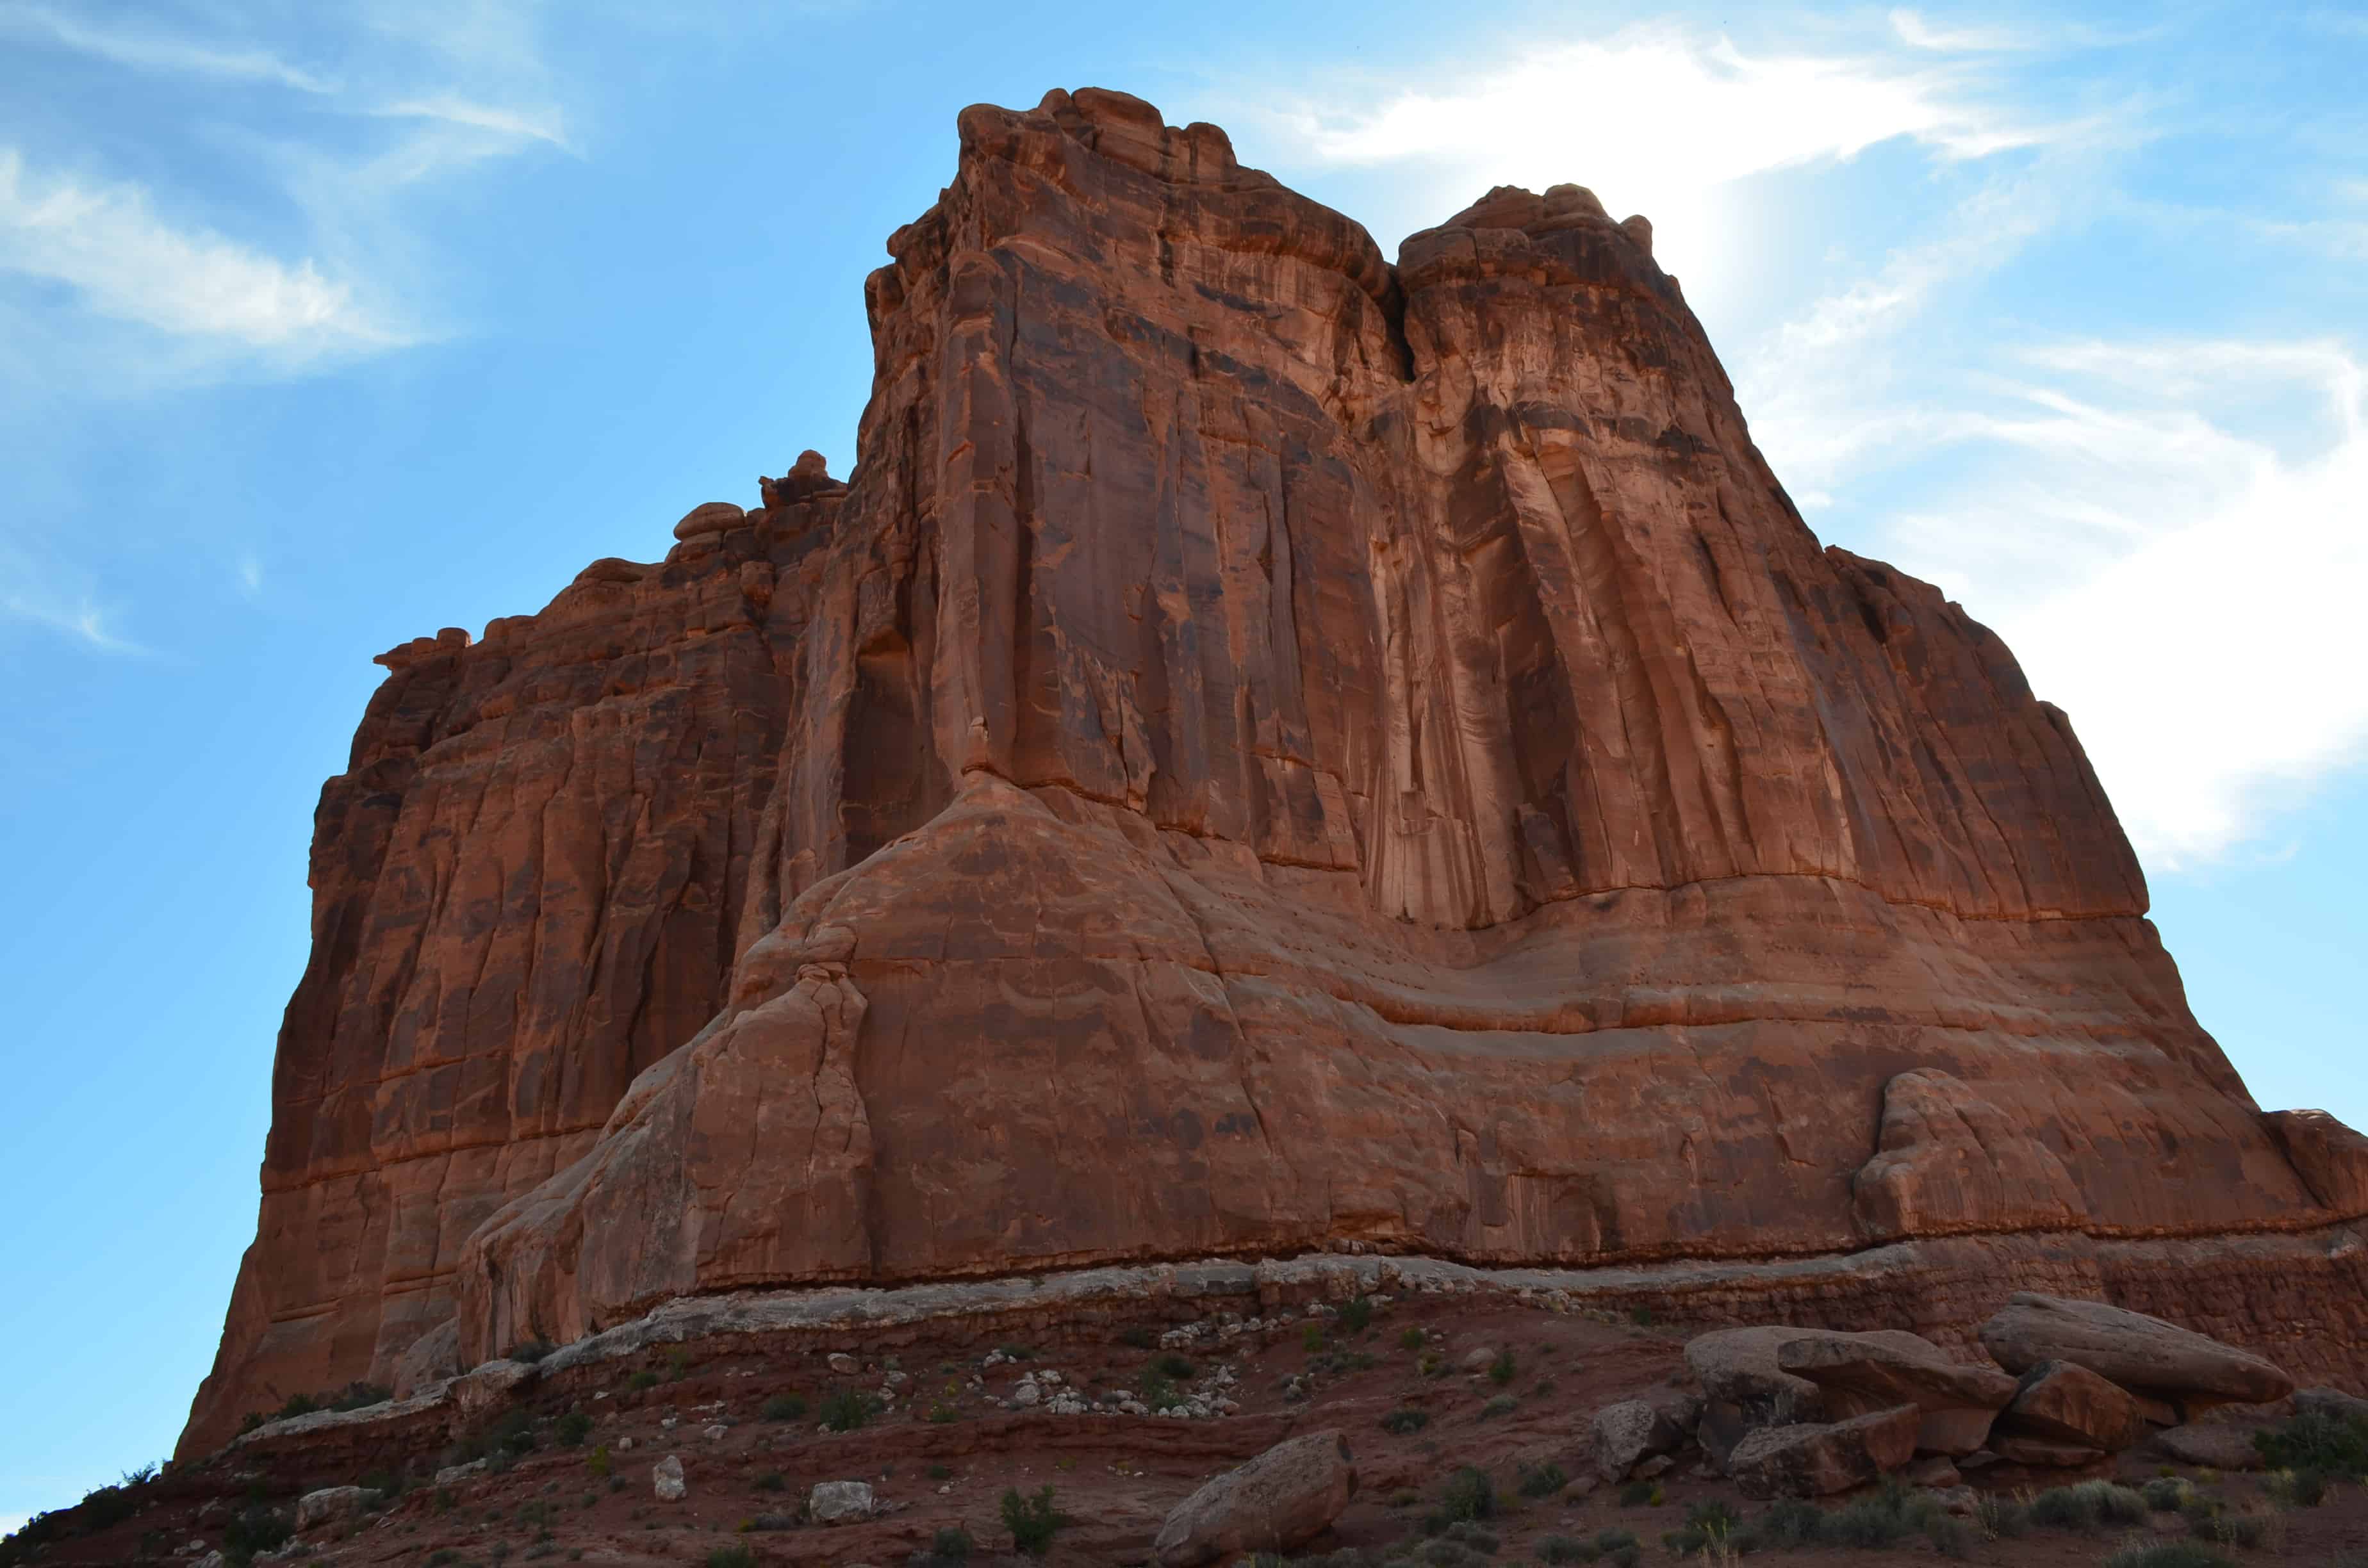 The Organ at Courthouse Towers Viewpoint at Arches National Park, Utah